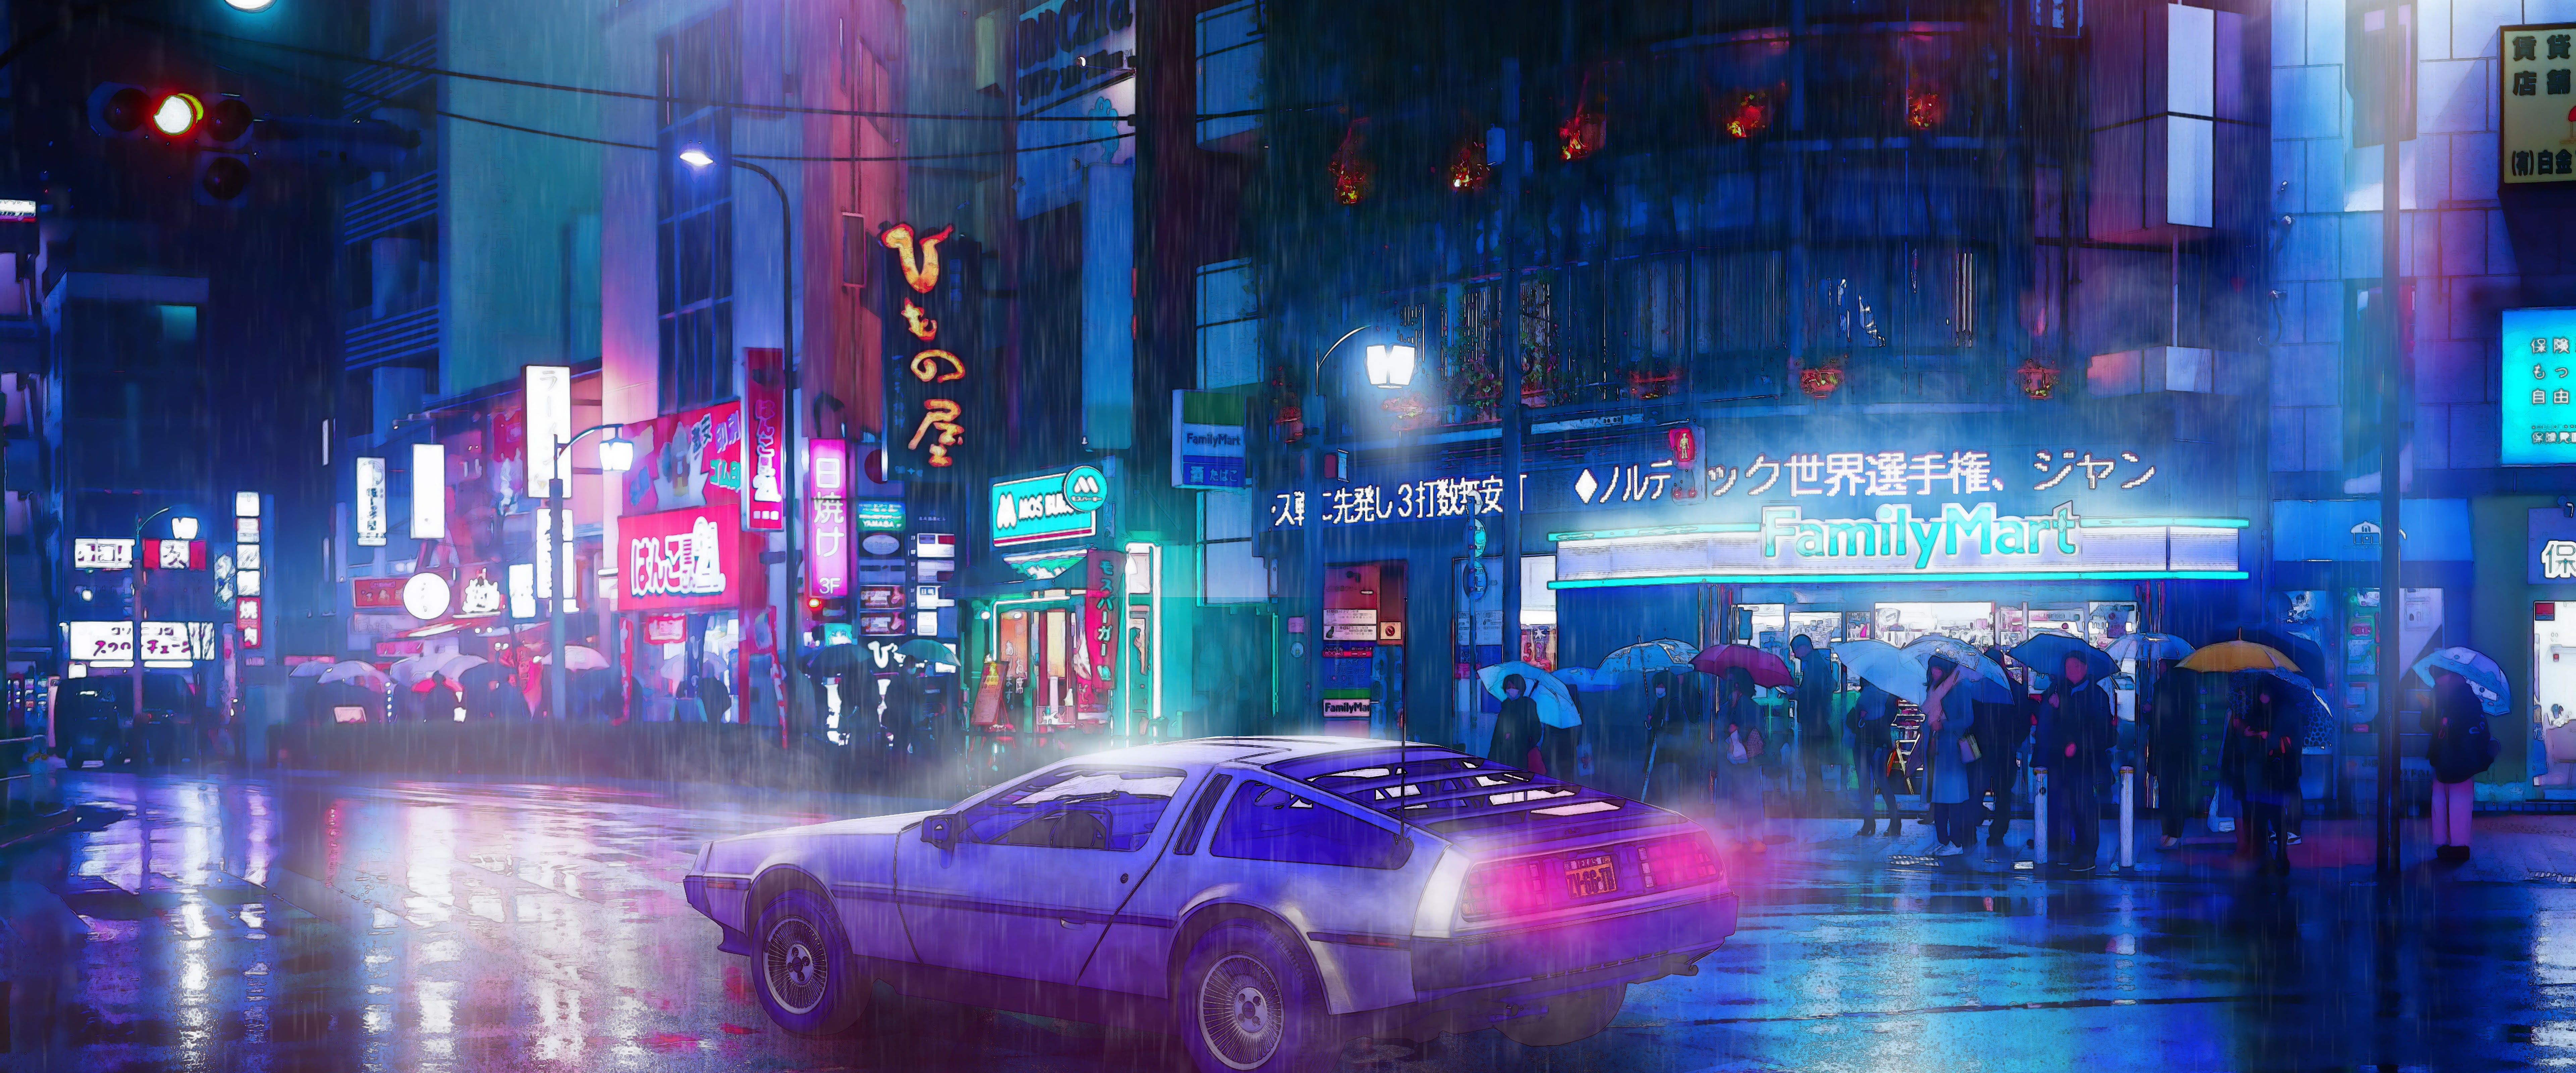 Some 21:9 wallpaper I edited of Night City. Feel free to use :  r/LowSodiumCyberpunk